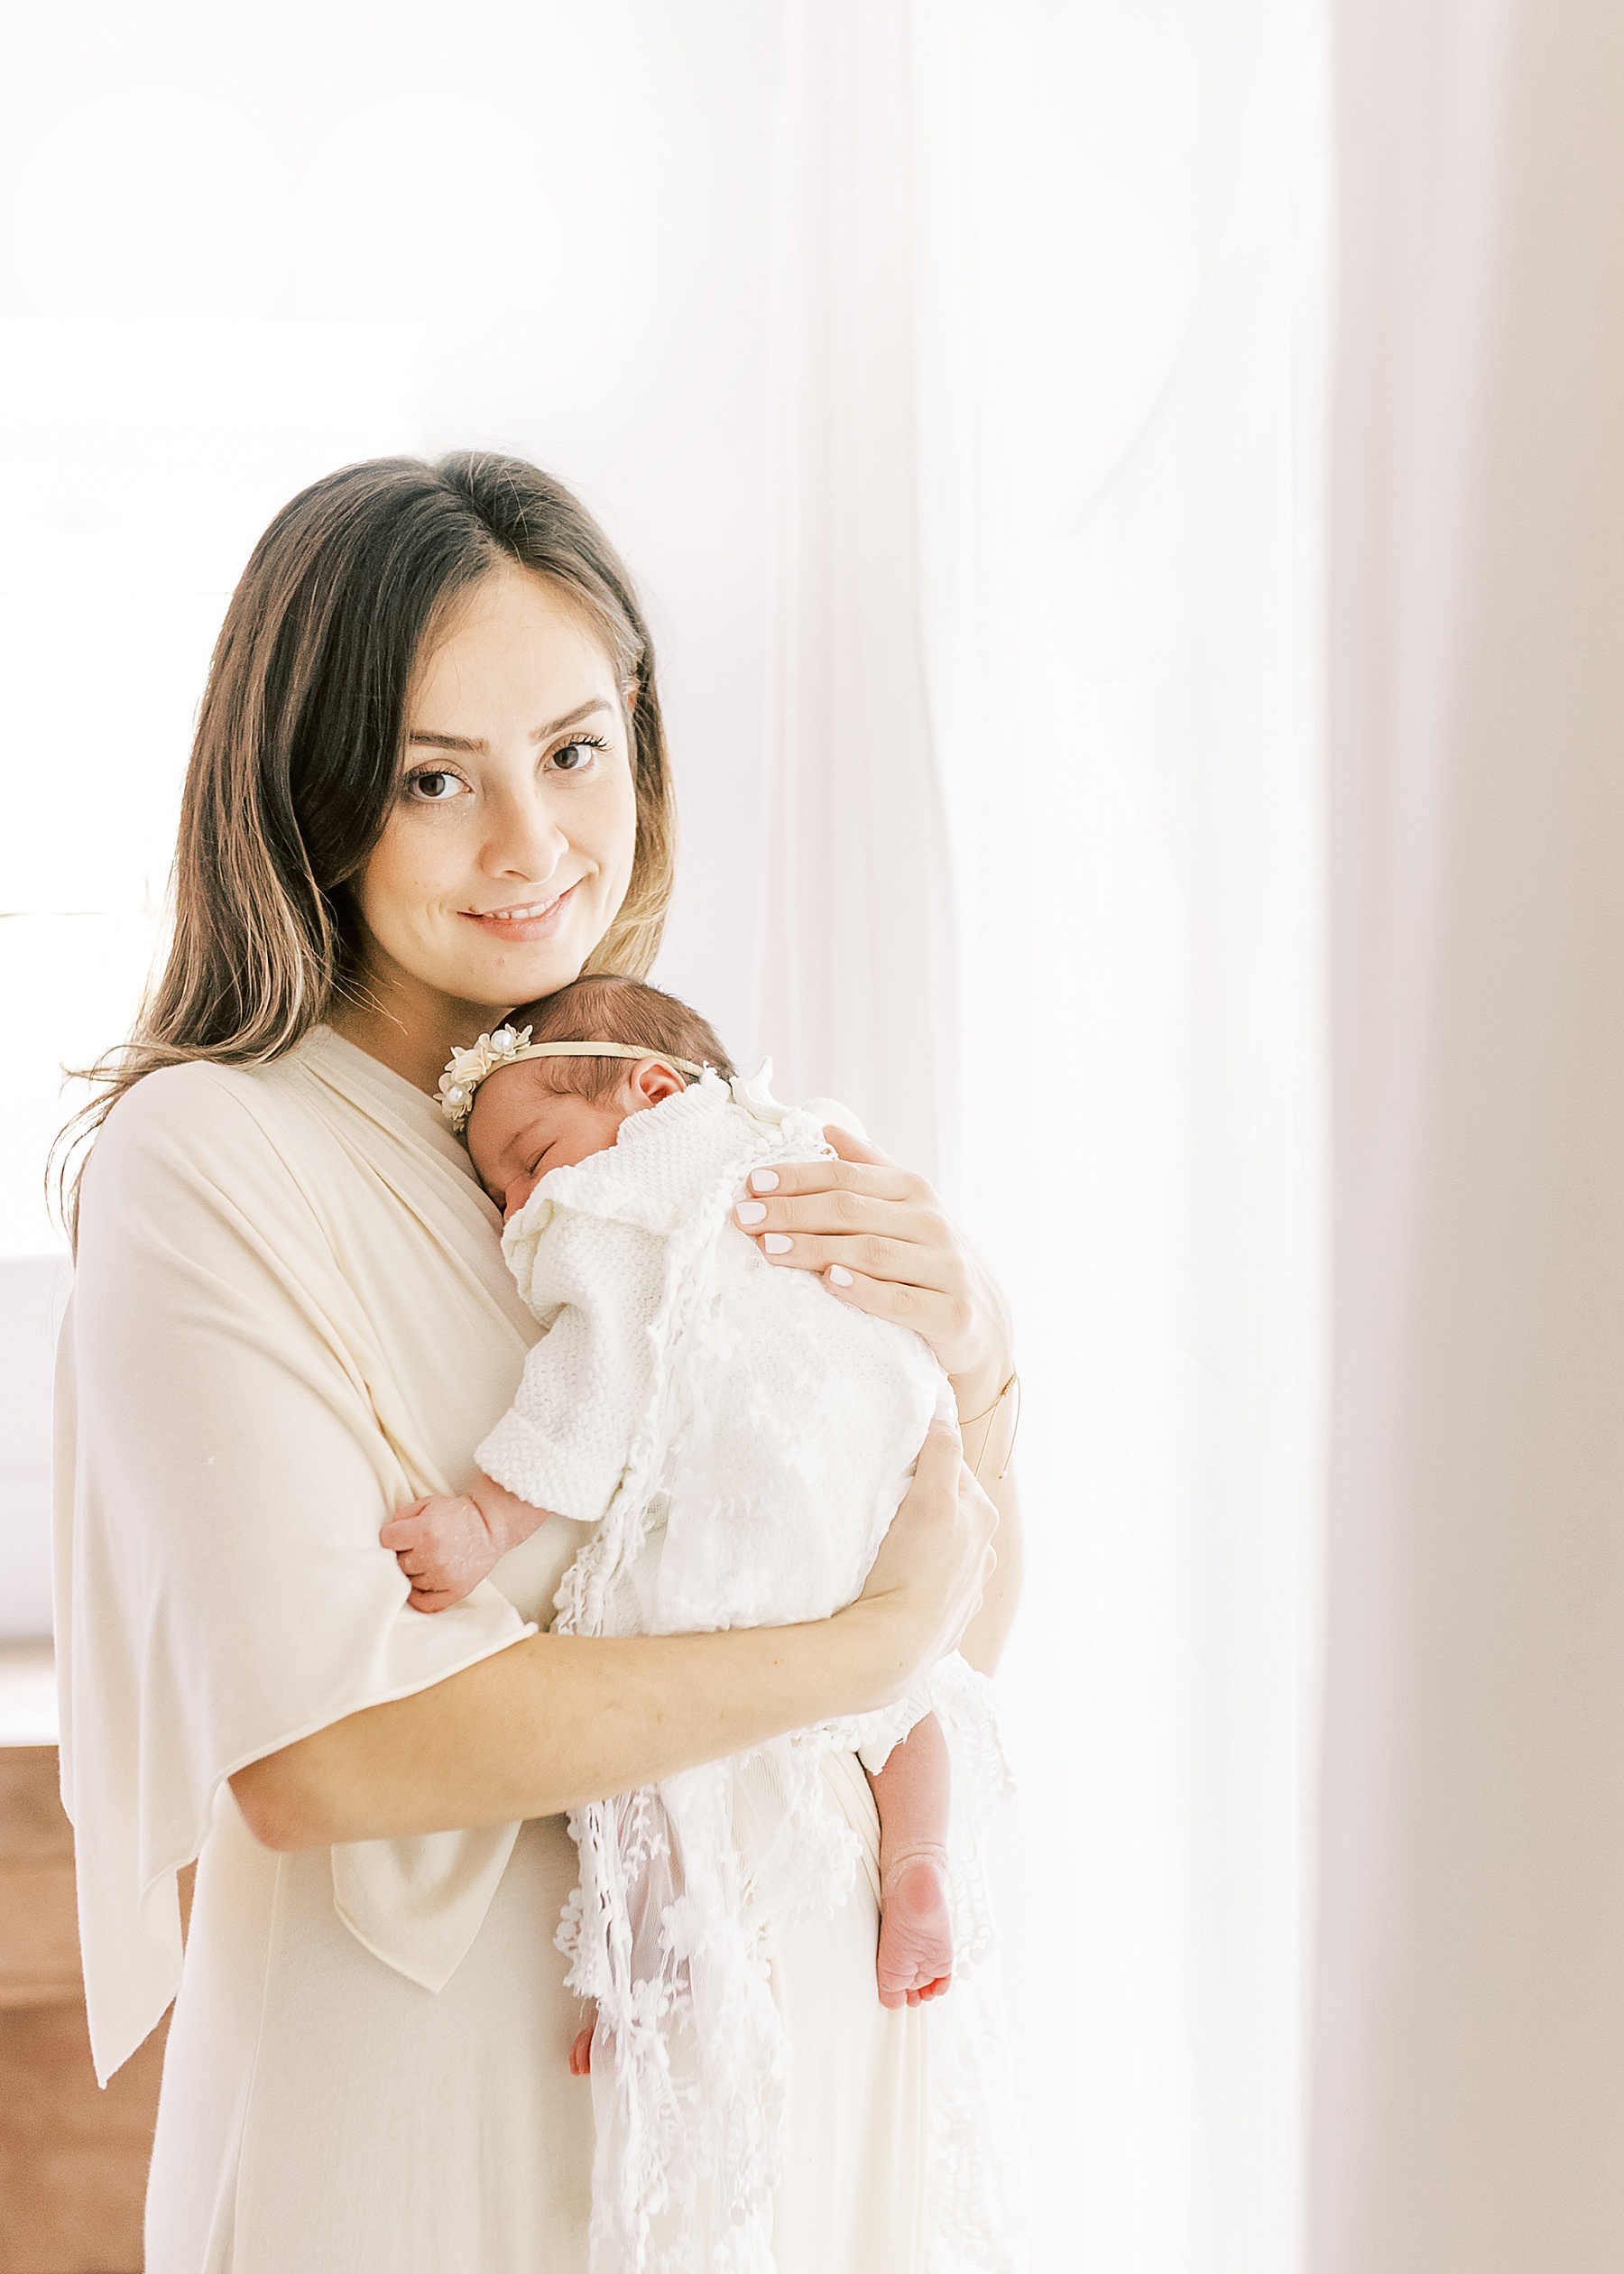 woman in cream long dress holding newborn baby girl dressed in white against backlit window white sheers